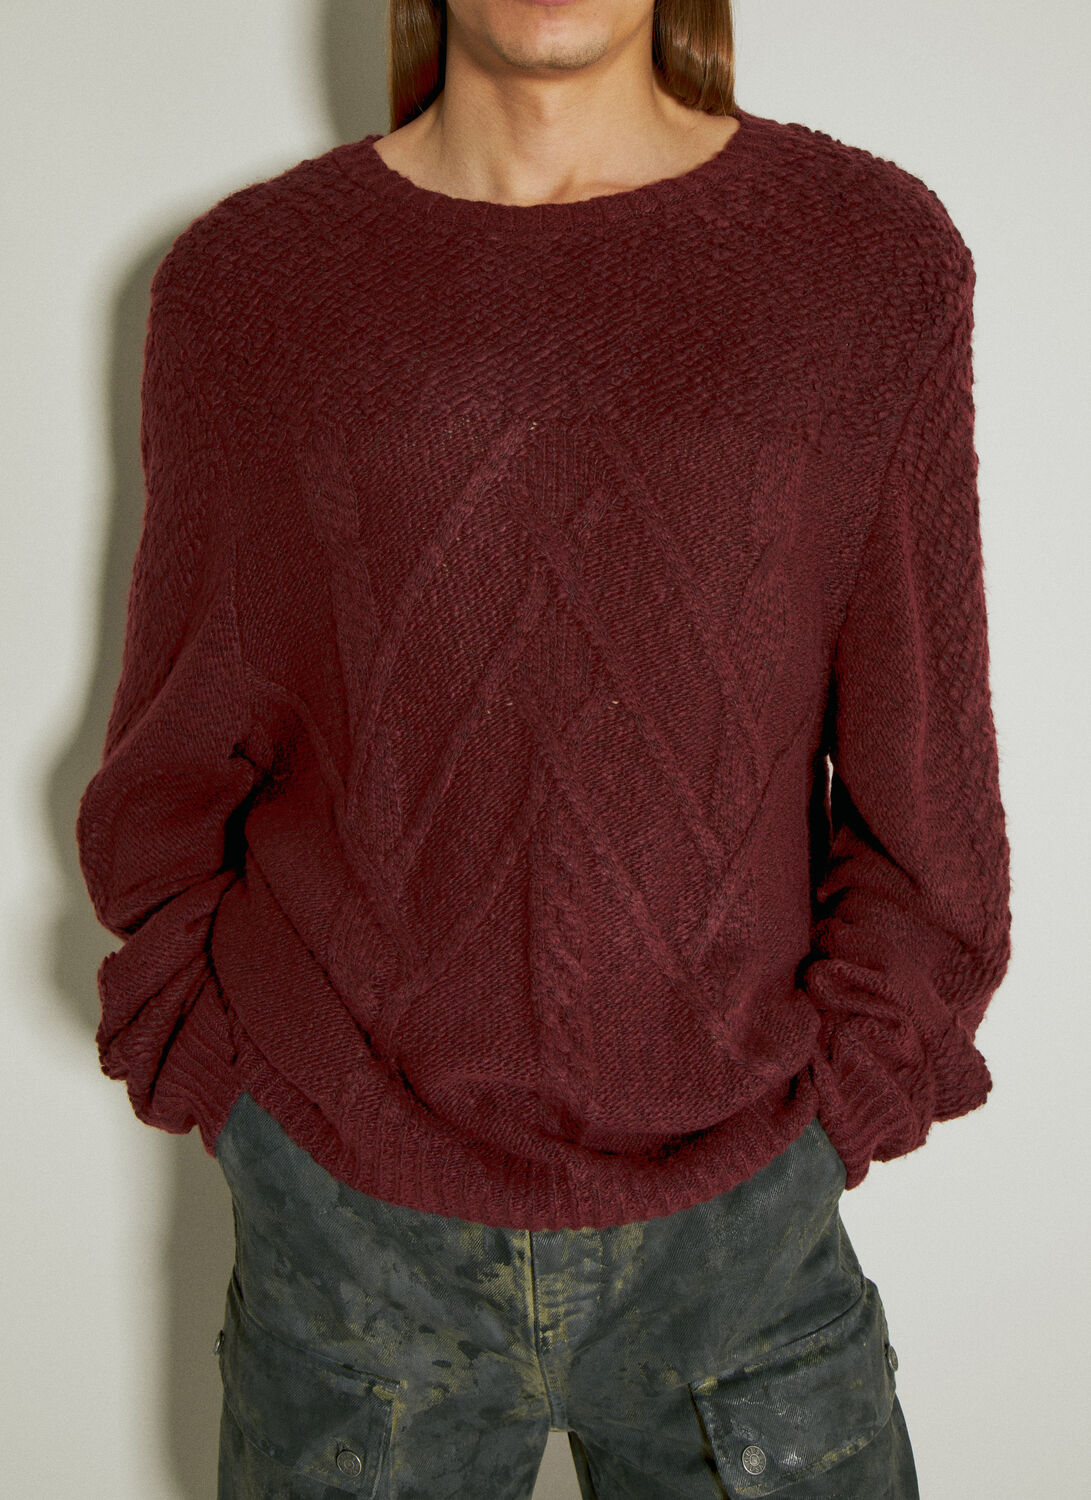 Guess Usa Loop Sweater In Burgundy